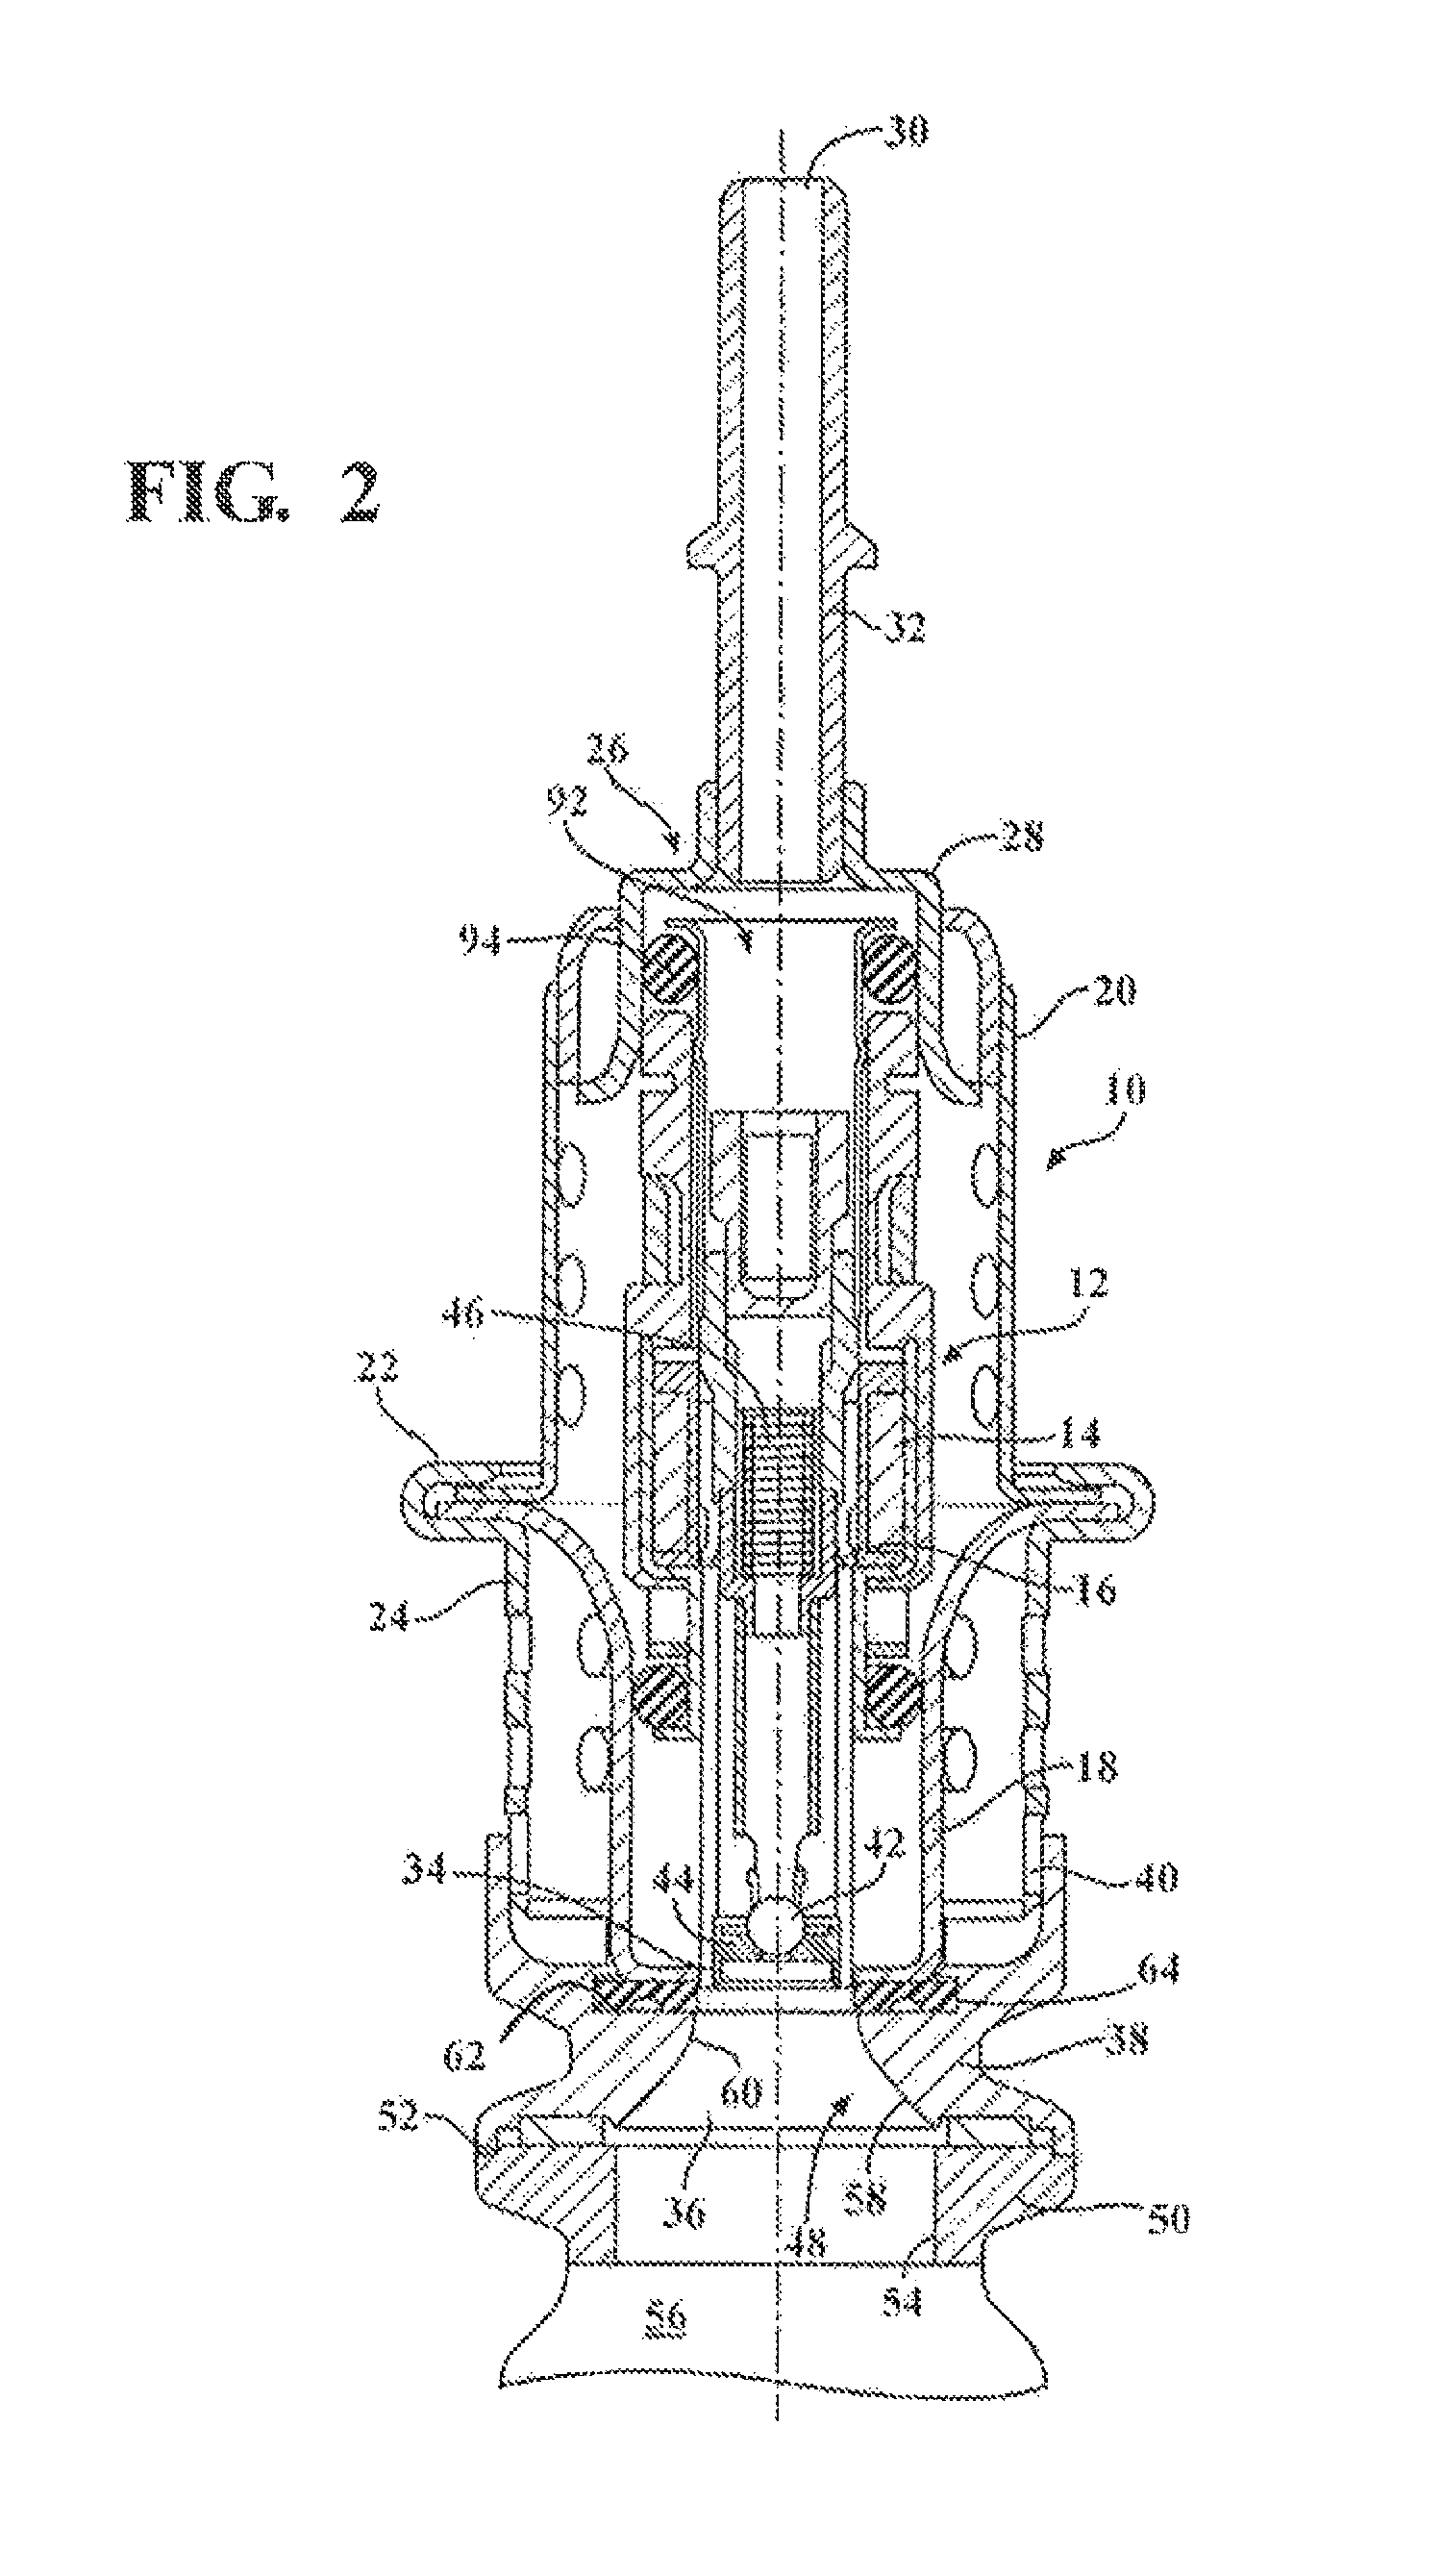 Purge system for reductant delivery unit for a selective catalytic reduction system